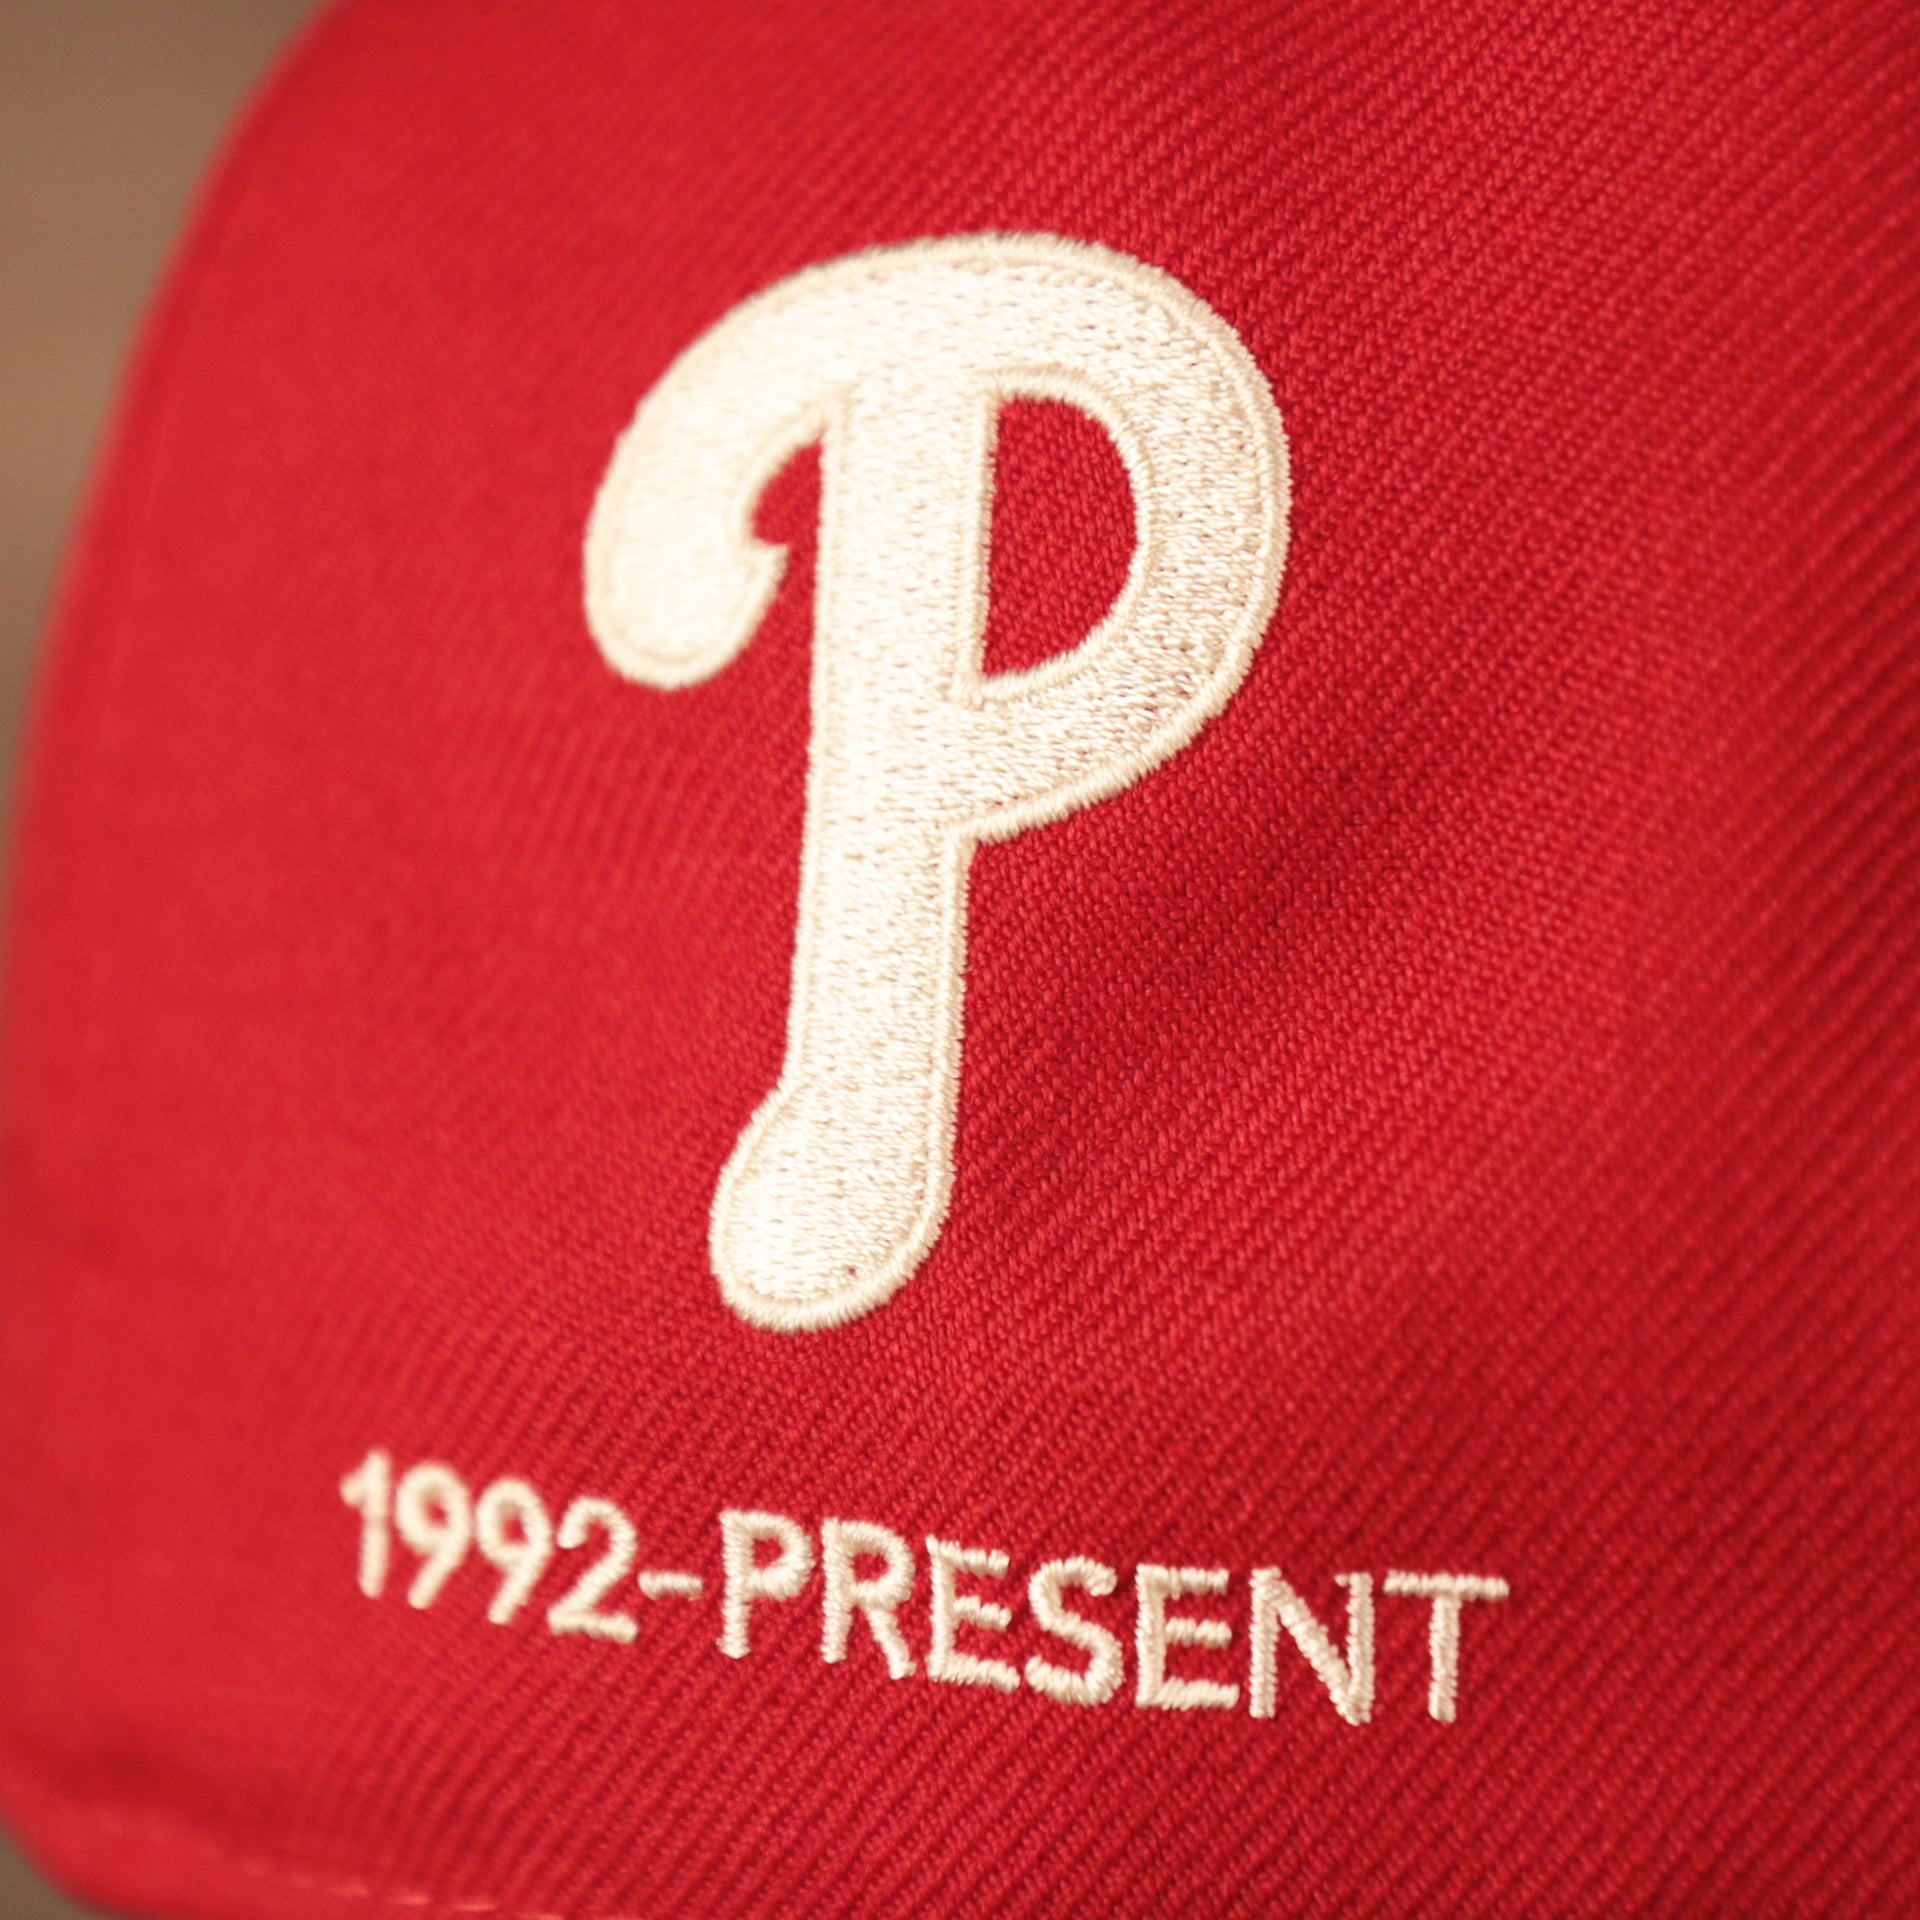 The current Phillies logo on the red old school New Era 59fifty with all over logo history of the team.